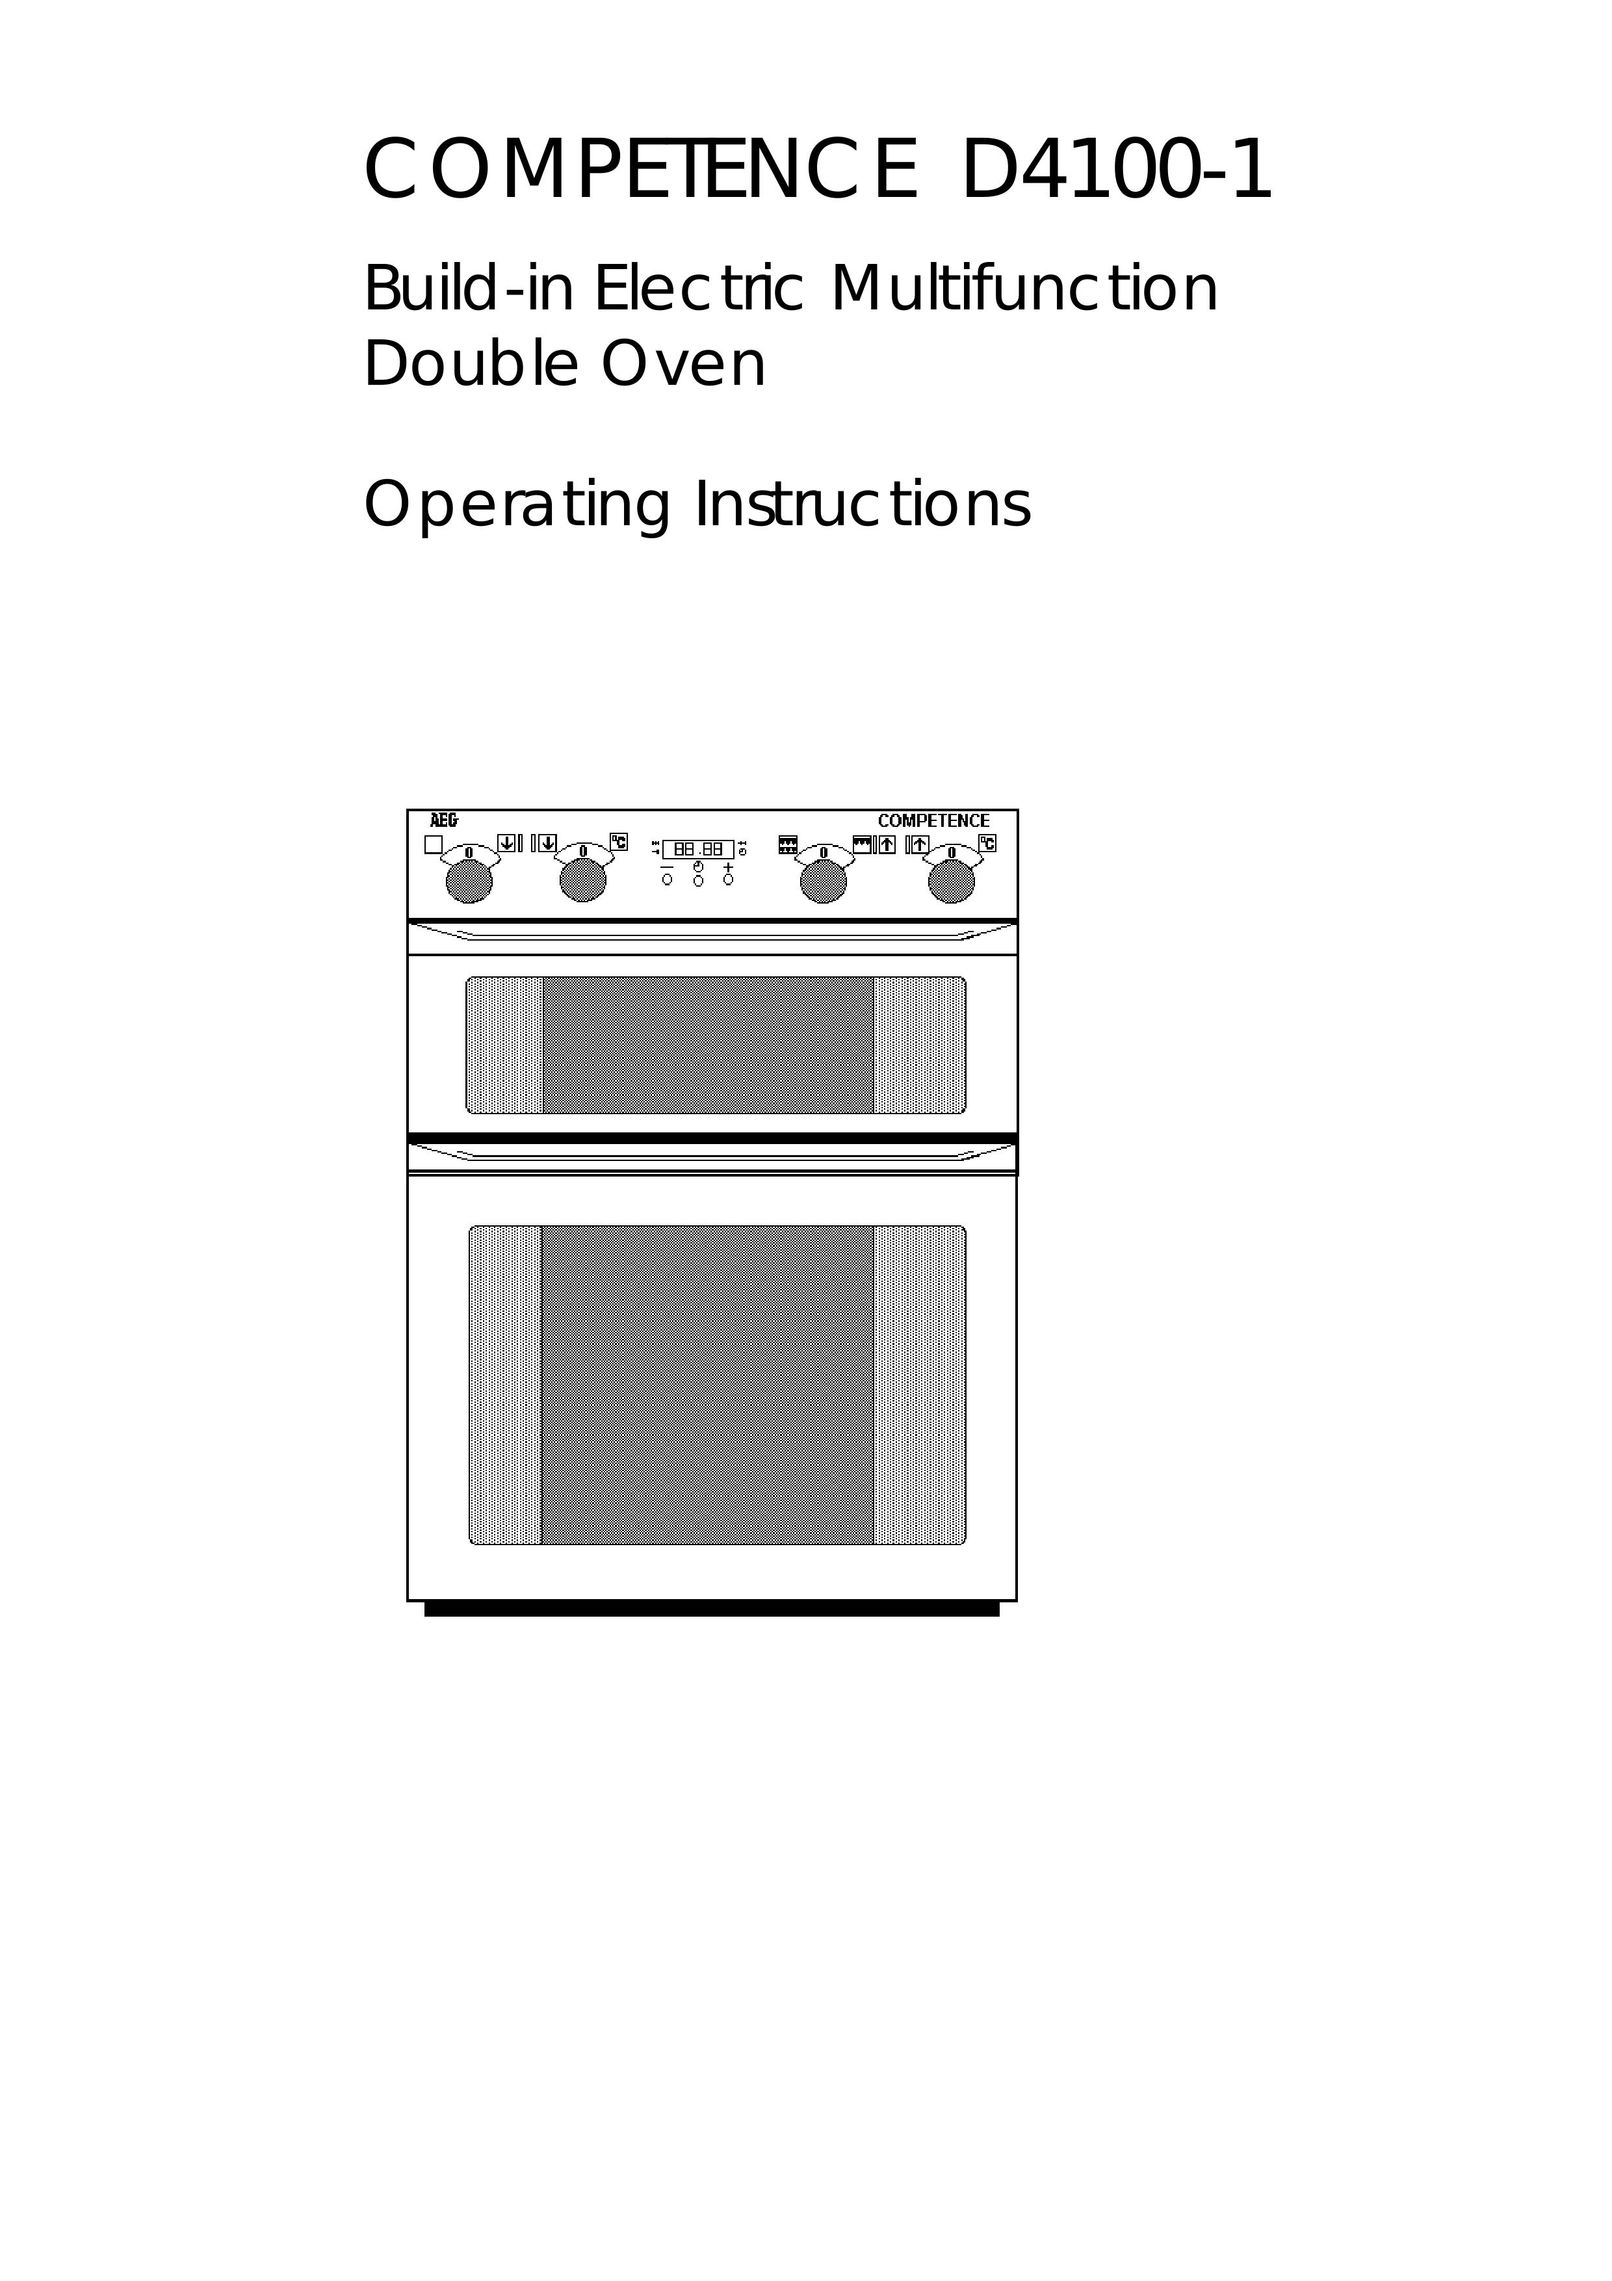 AEG D4100-1 Double Oven User Manual